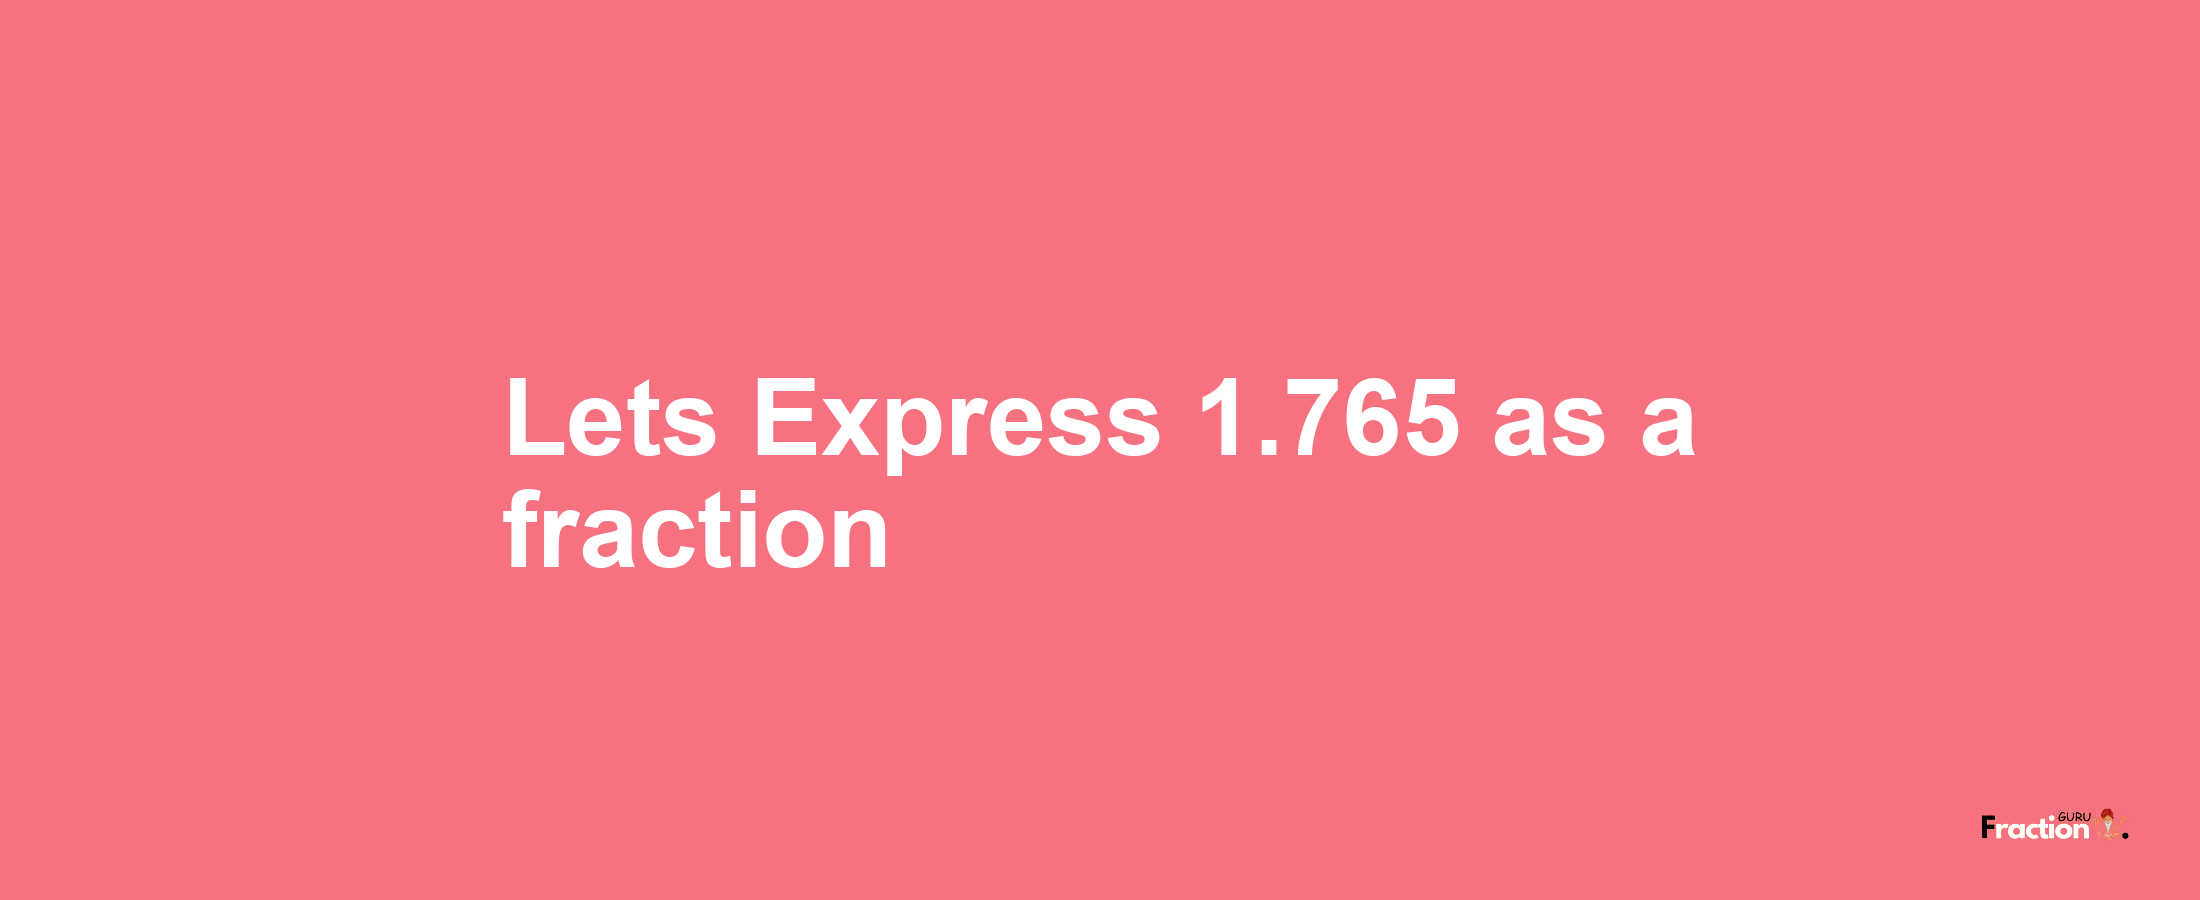 Lets Express 1.765 as afraction